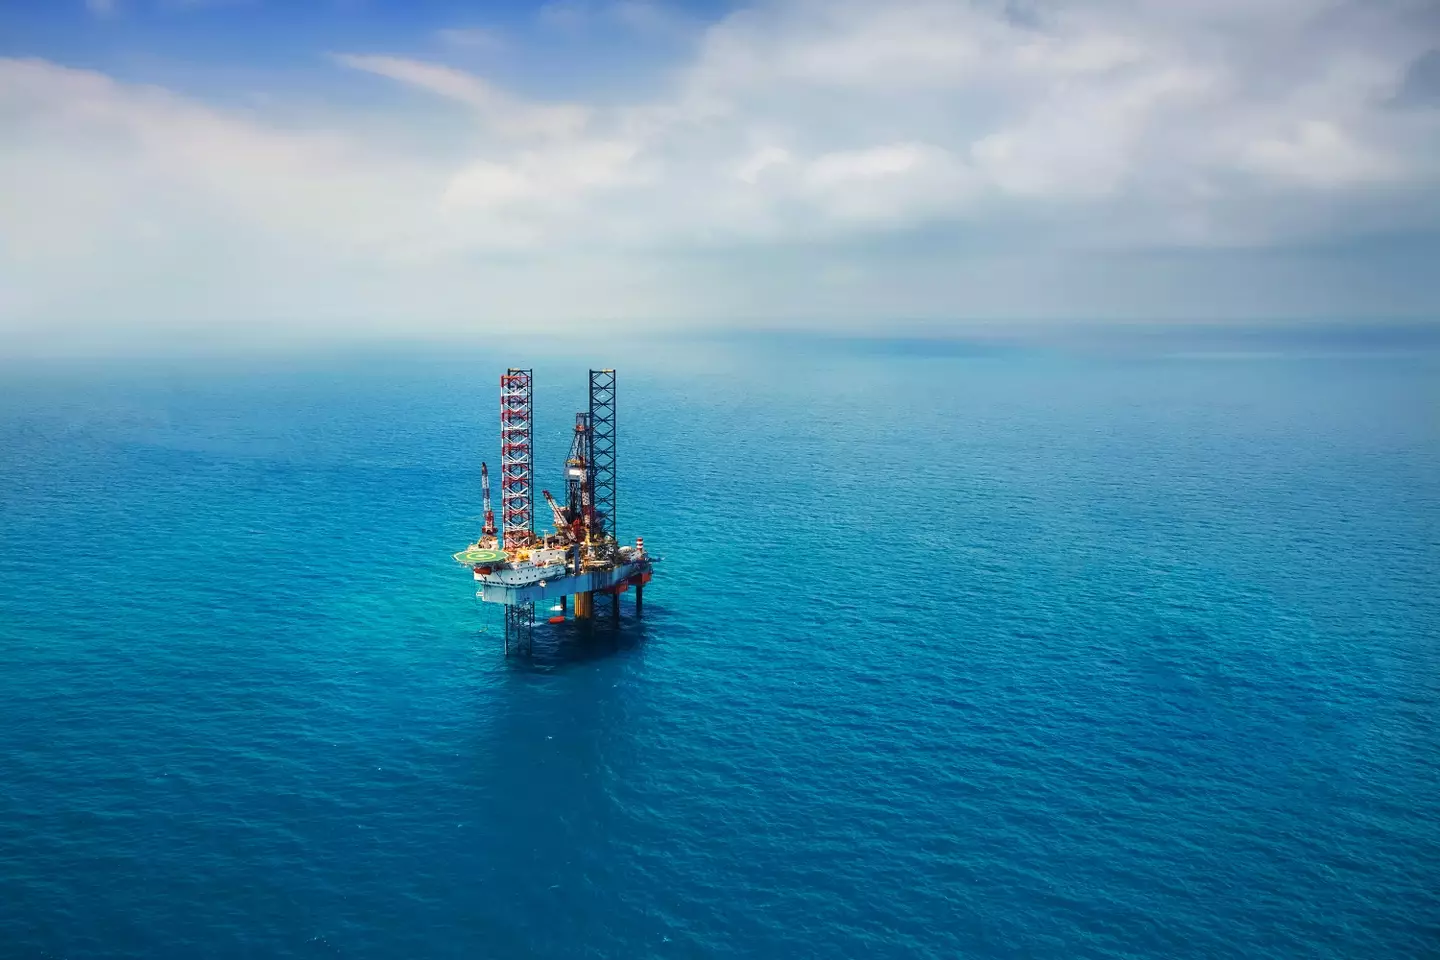 Offshore rigs usually extract oil but a new one could pump carbon dioxide into the bottom of the ocean (Kanok Sulaiman/Getty)